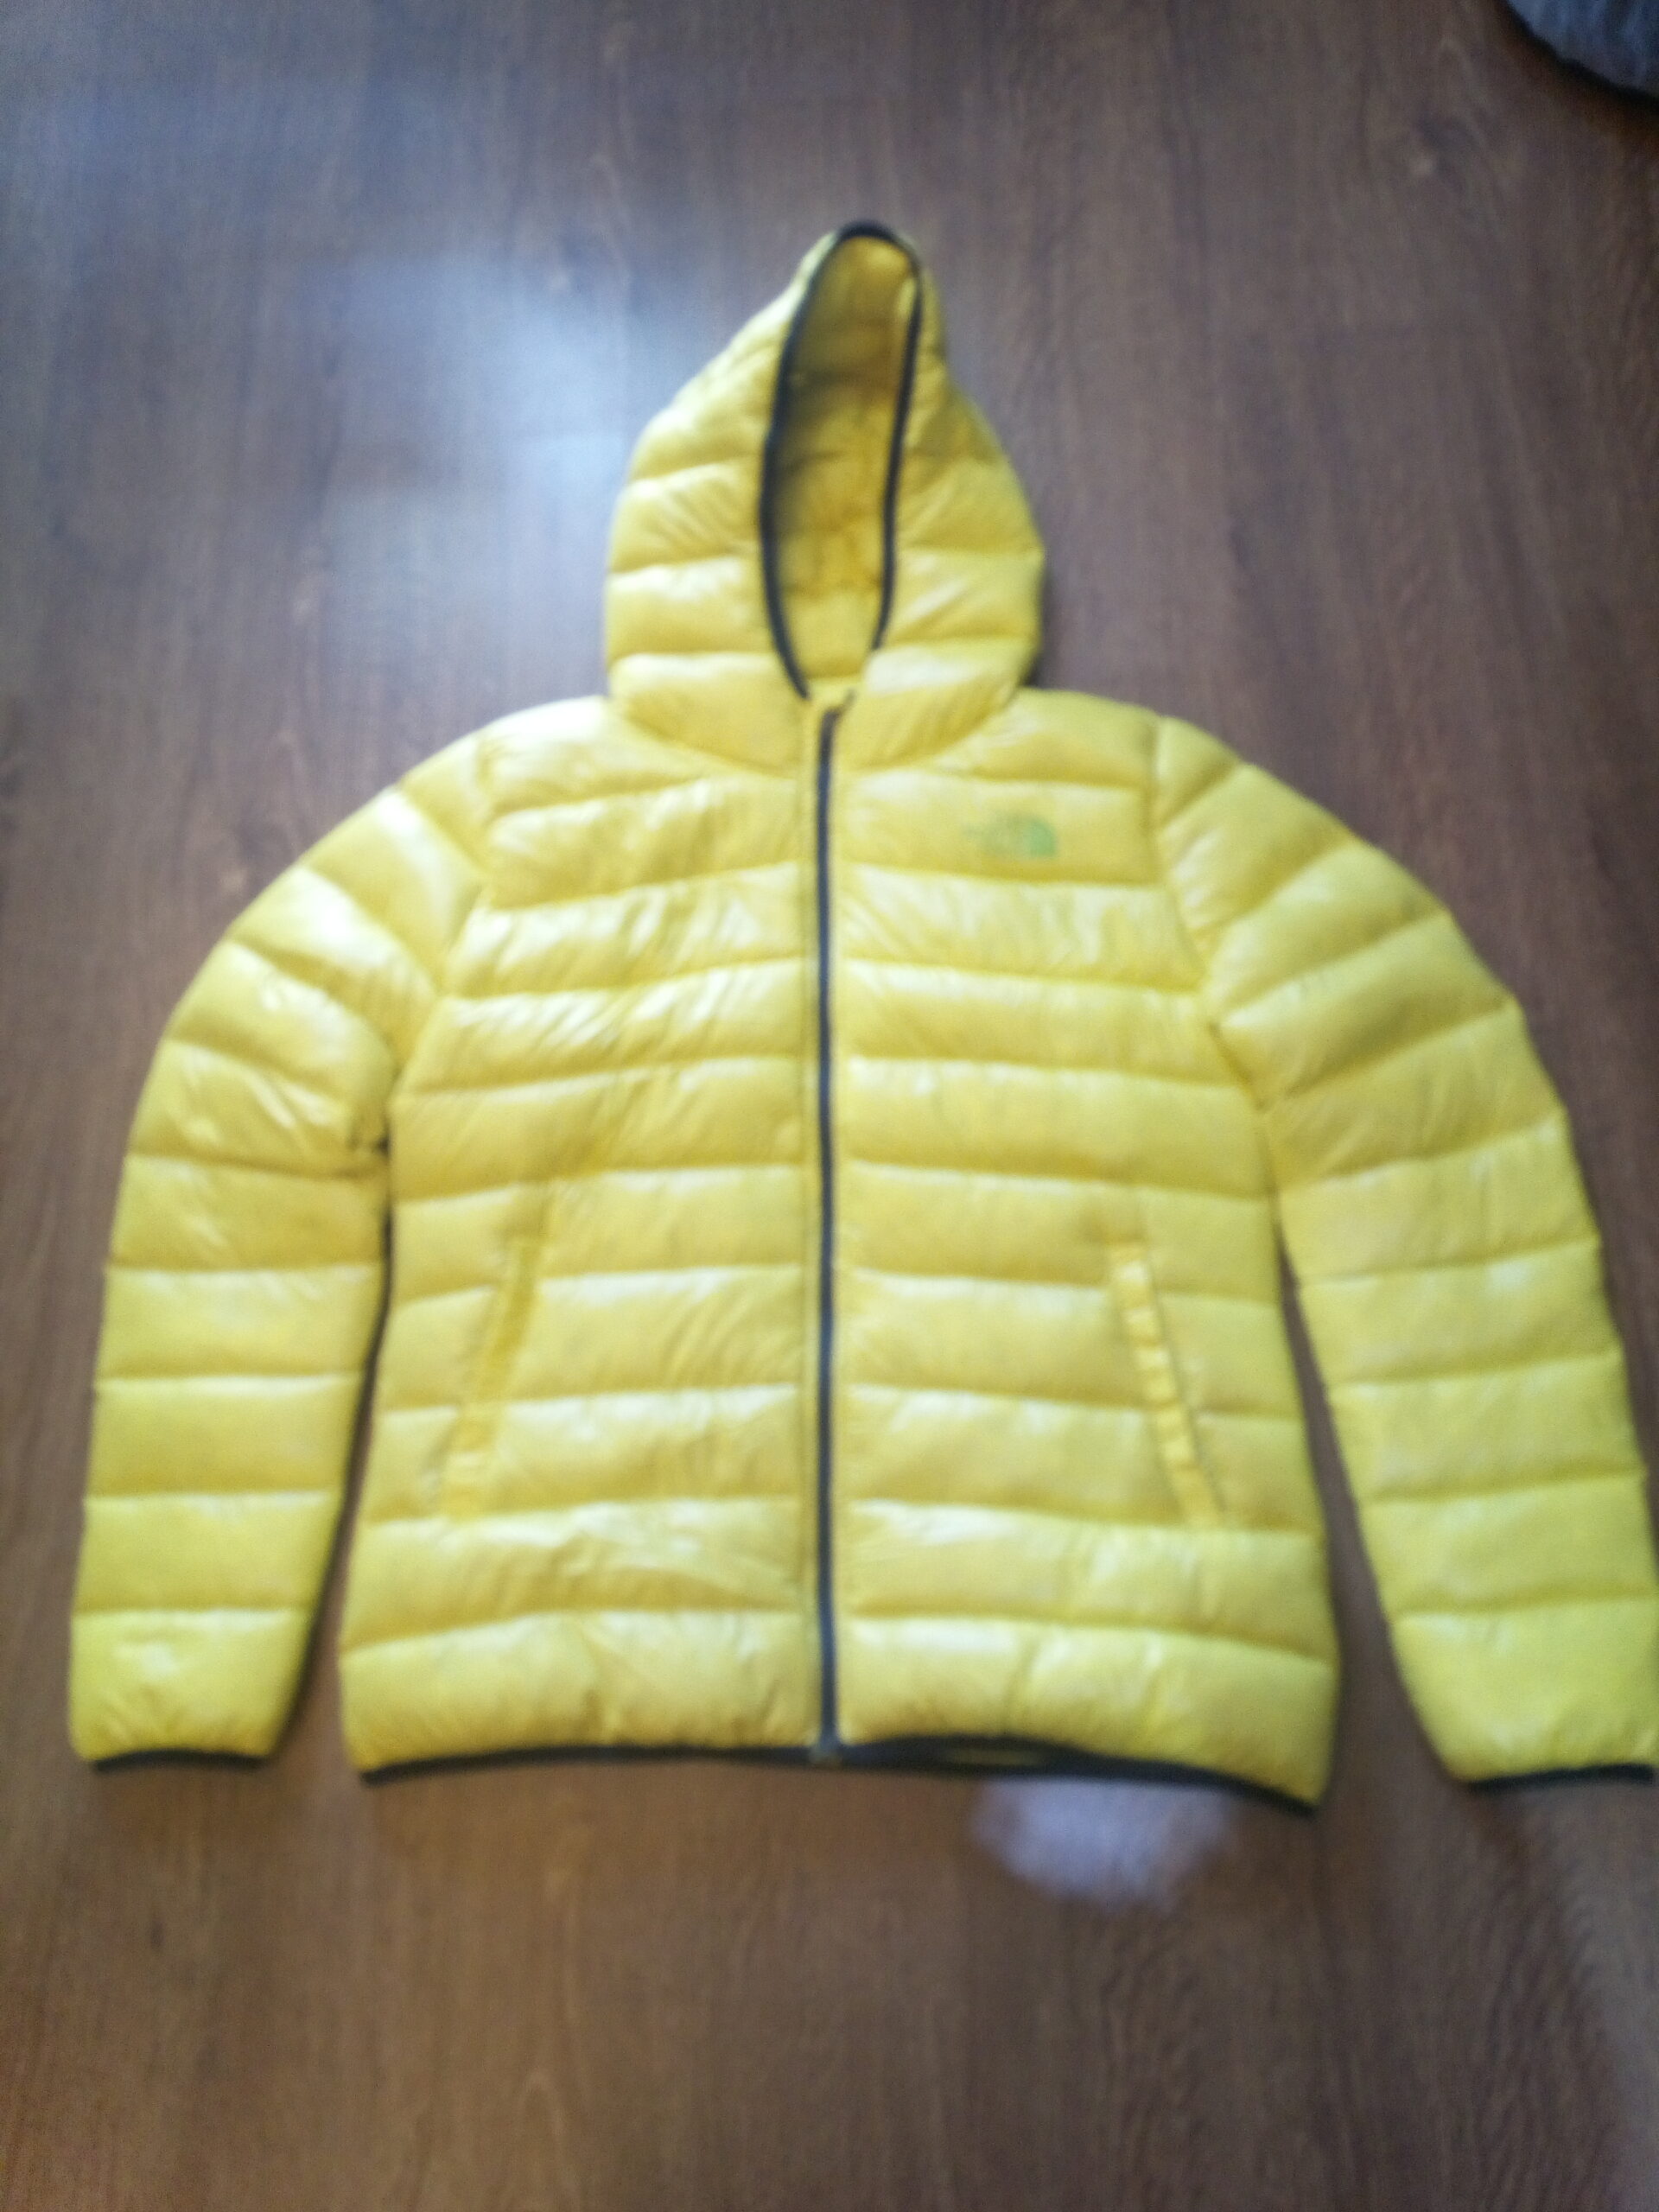 You are currently viewing Padding – Jacket